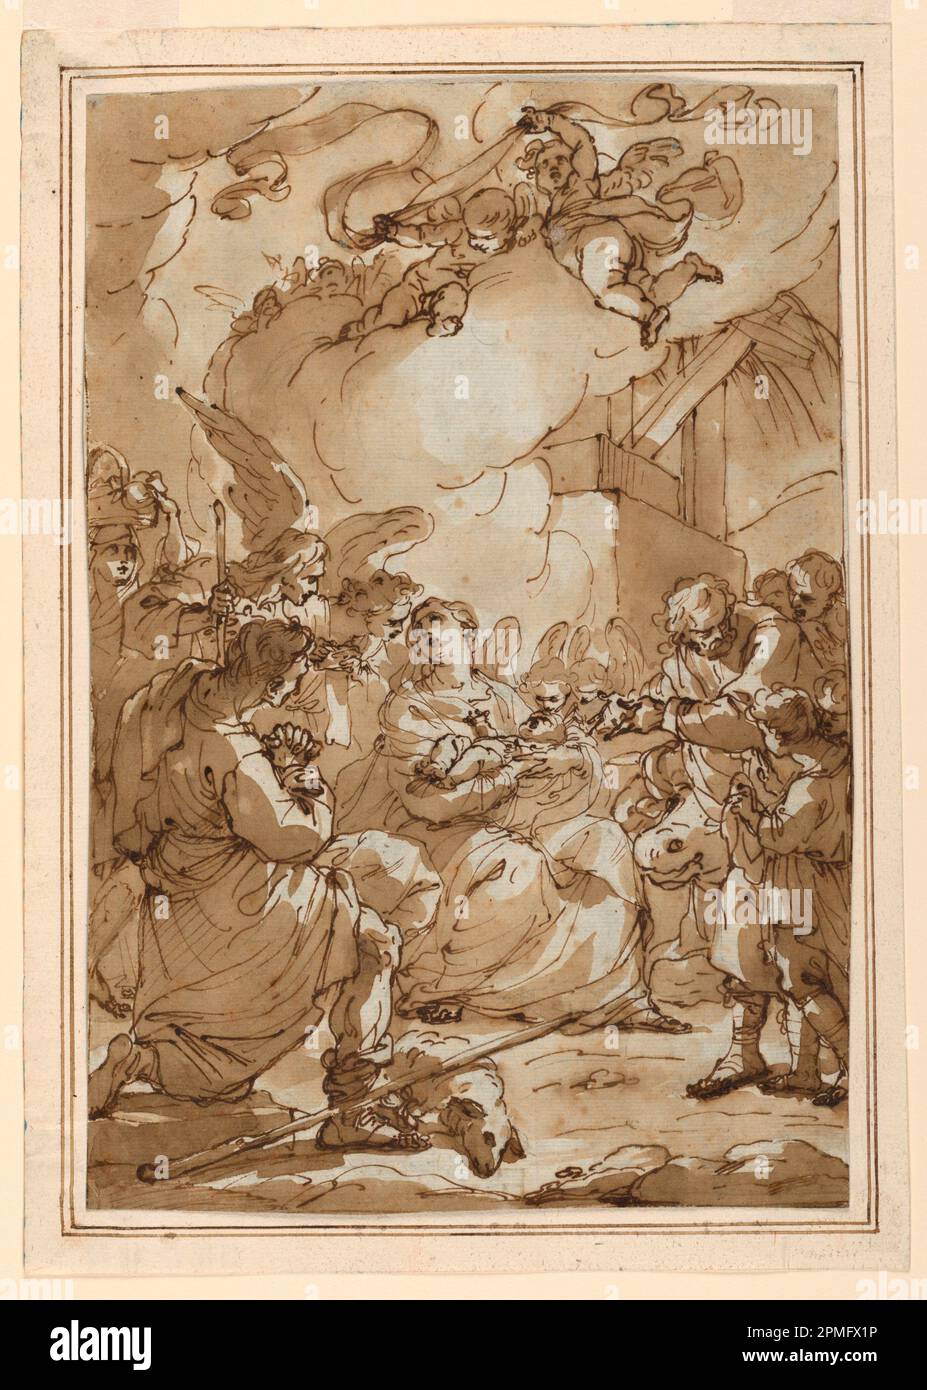 Drawing, Adoration of the Shepherds; Ubaldo Gandolfi (Italian, 1728 – 1781); Italy; pen and brown ink, brush and brown wash, black chalk on white laid paper, laid down on blue wove paper; 28.2 x 19.5 cm (11 1/8 x 7 11/16 in.) mount 31.2 x 22.2cm Mat: 45.7 x 35.6 cm (18 x 14 in.) Stock Photo